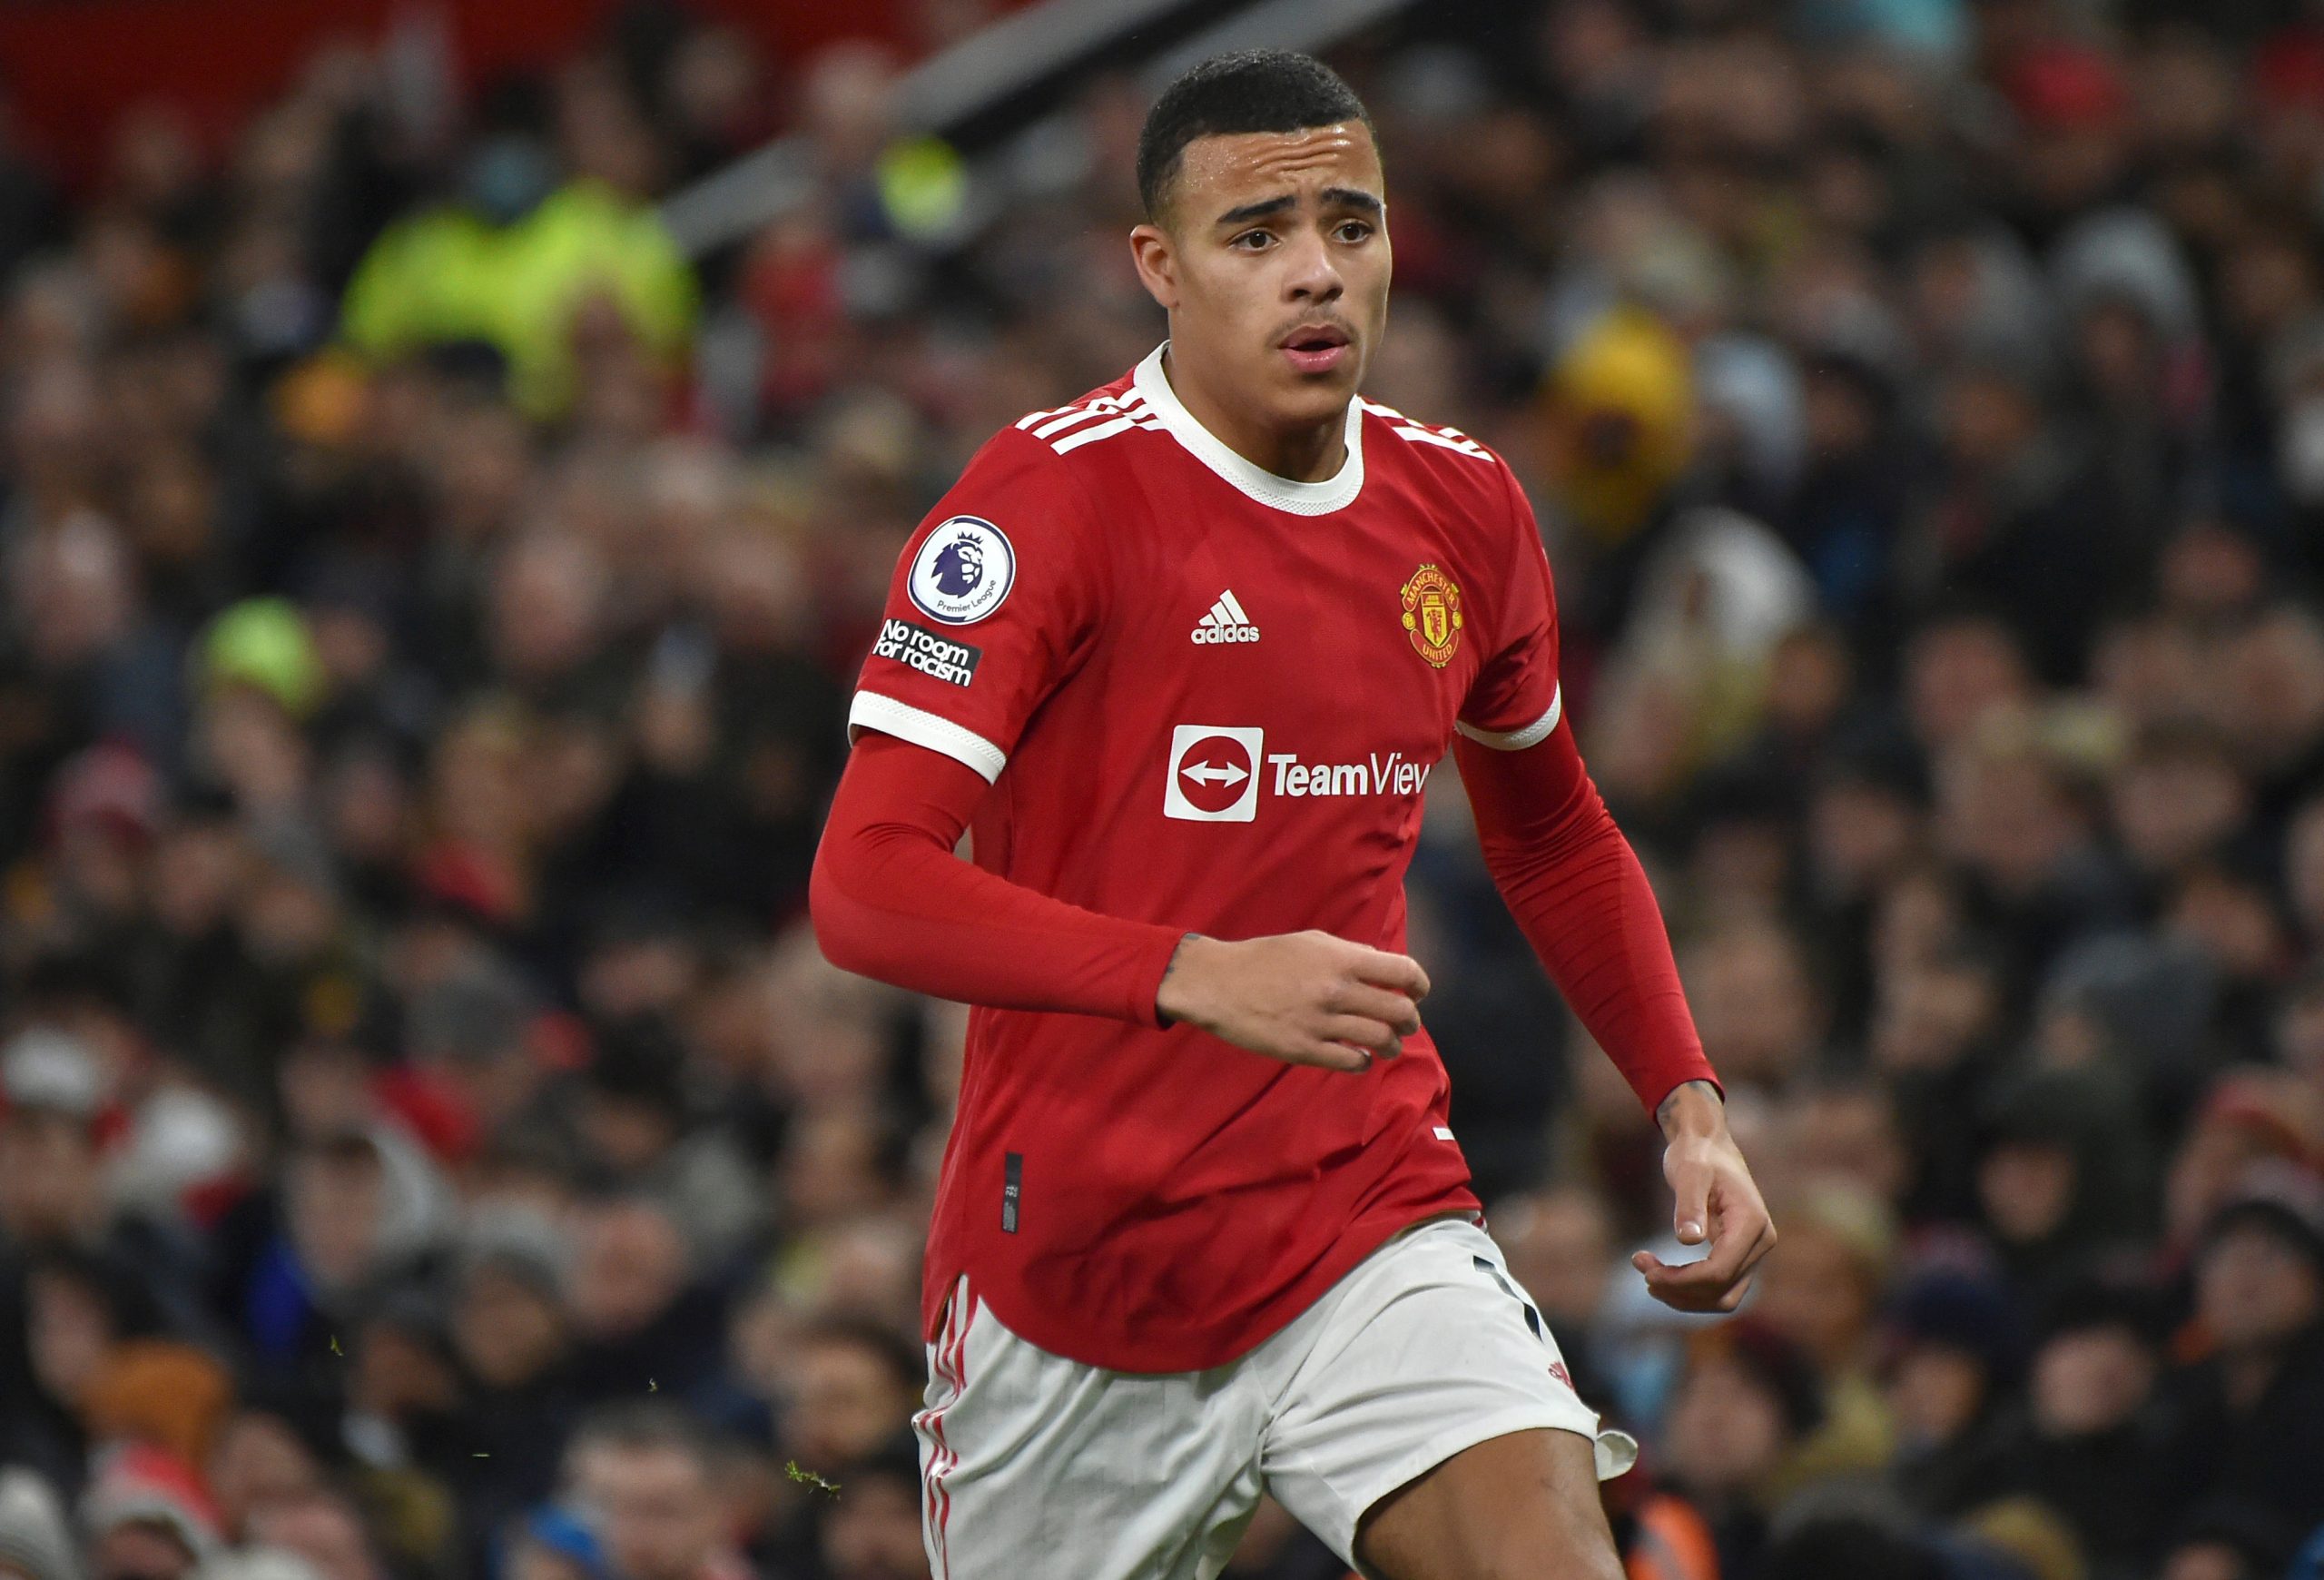 Manchester United player Mason Greenwood released on bail